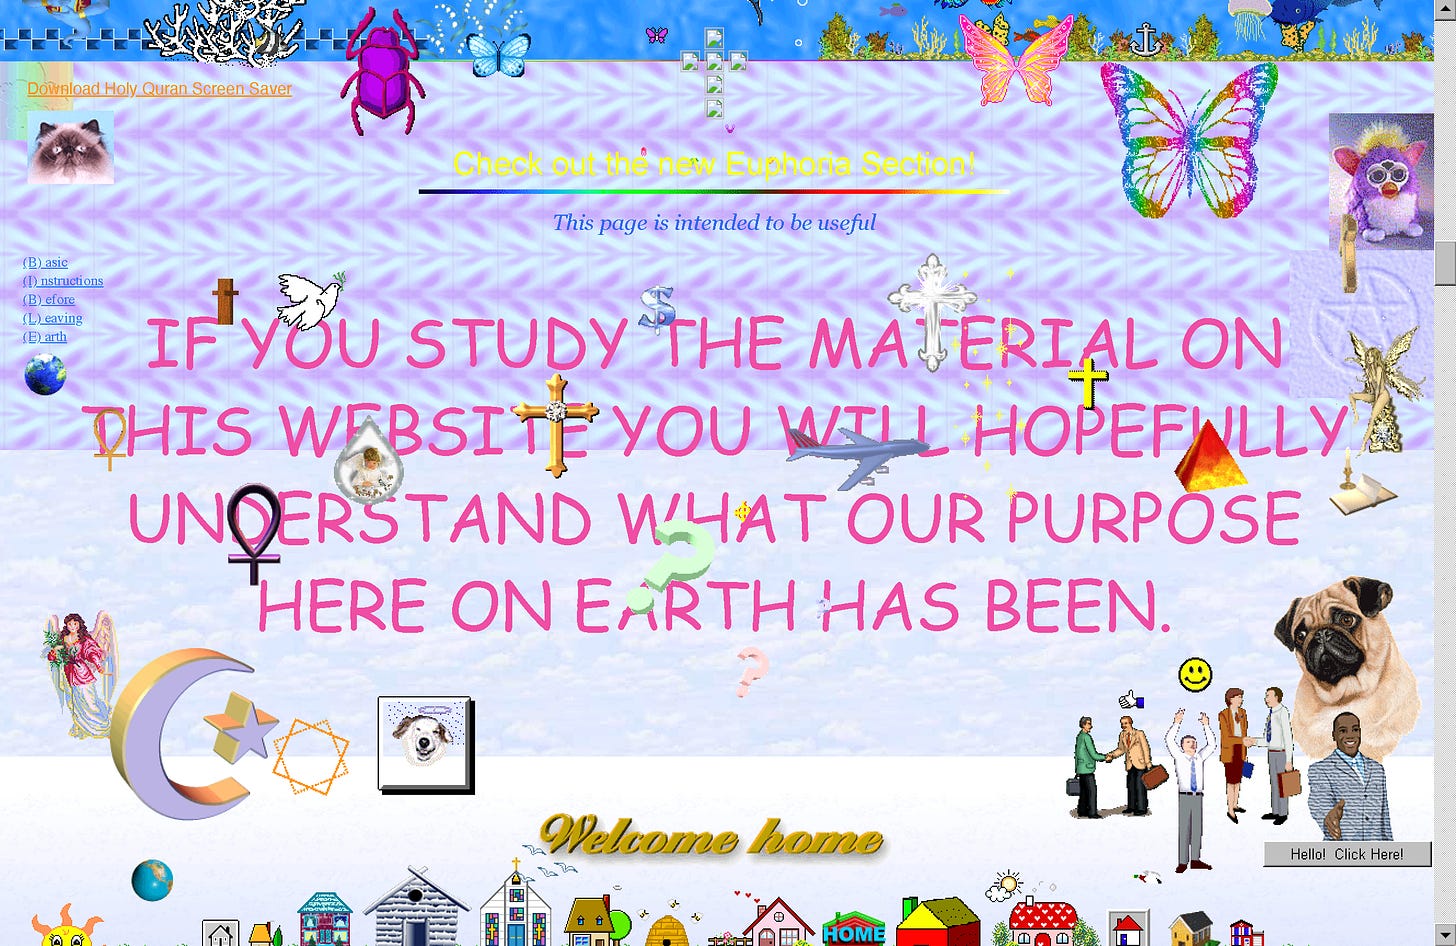 a chaotic webpage with many textures, clip art illustrations of pugs, people, houses, butterflies, and the text "if you study the material on this website you will hopefully understand what our purpose here on earth has been"